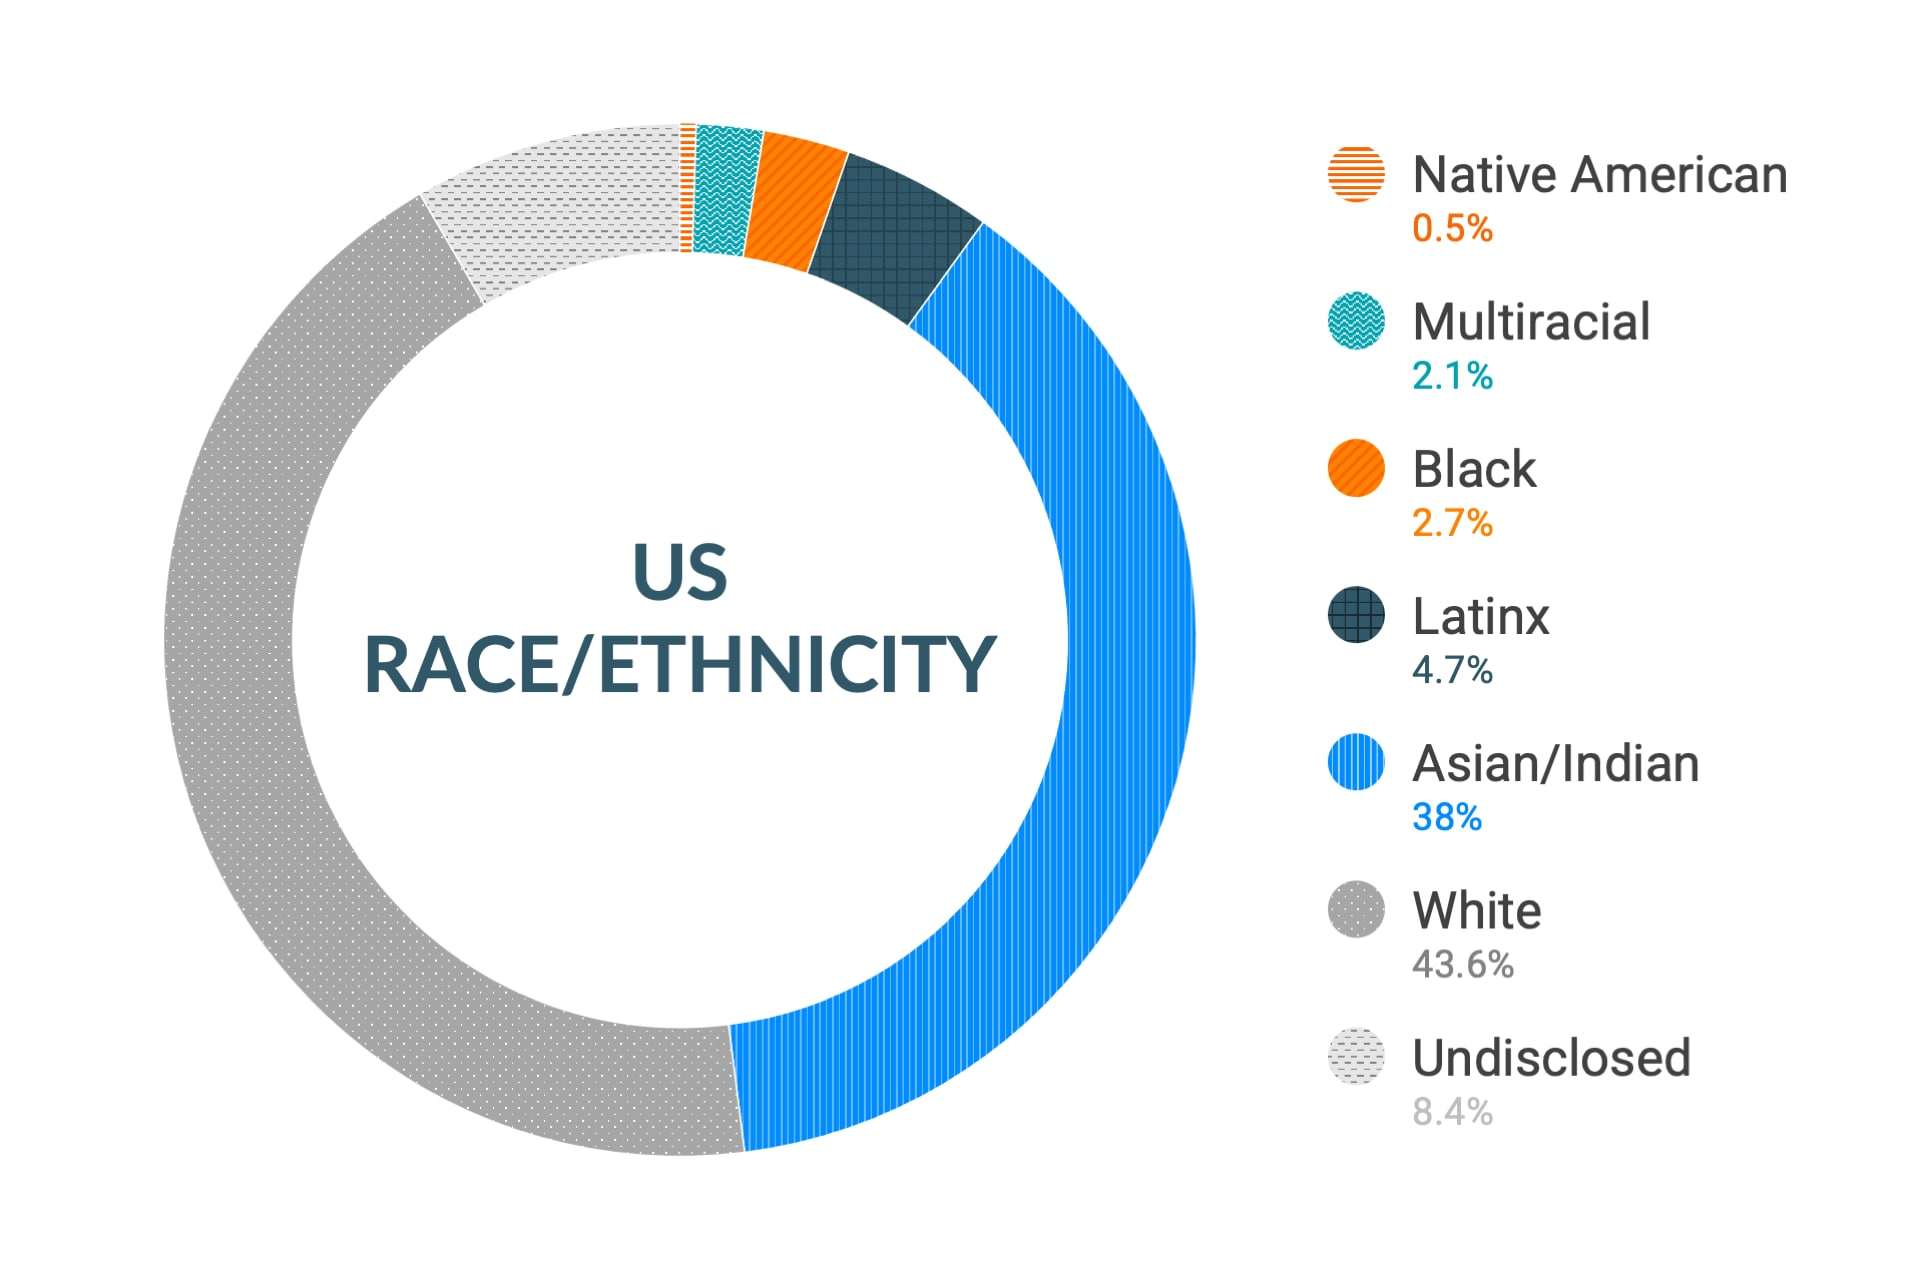 Cloudera Diversity and Inclusion data for U.S. Race and Ethnicity: Native American 0.5%, Multiracial 2.1%, Black 2.7%, Latinx 4.7%, Asian and Indian 38%, White 43.6%, Undisclosed 8.4%